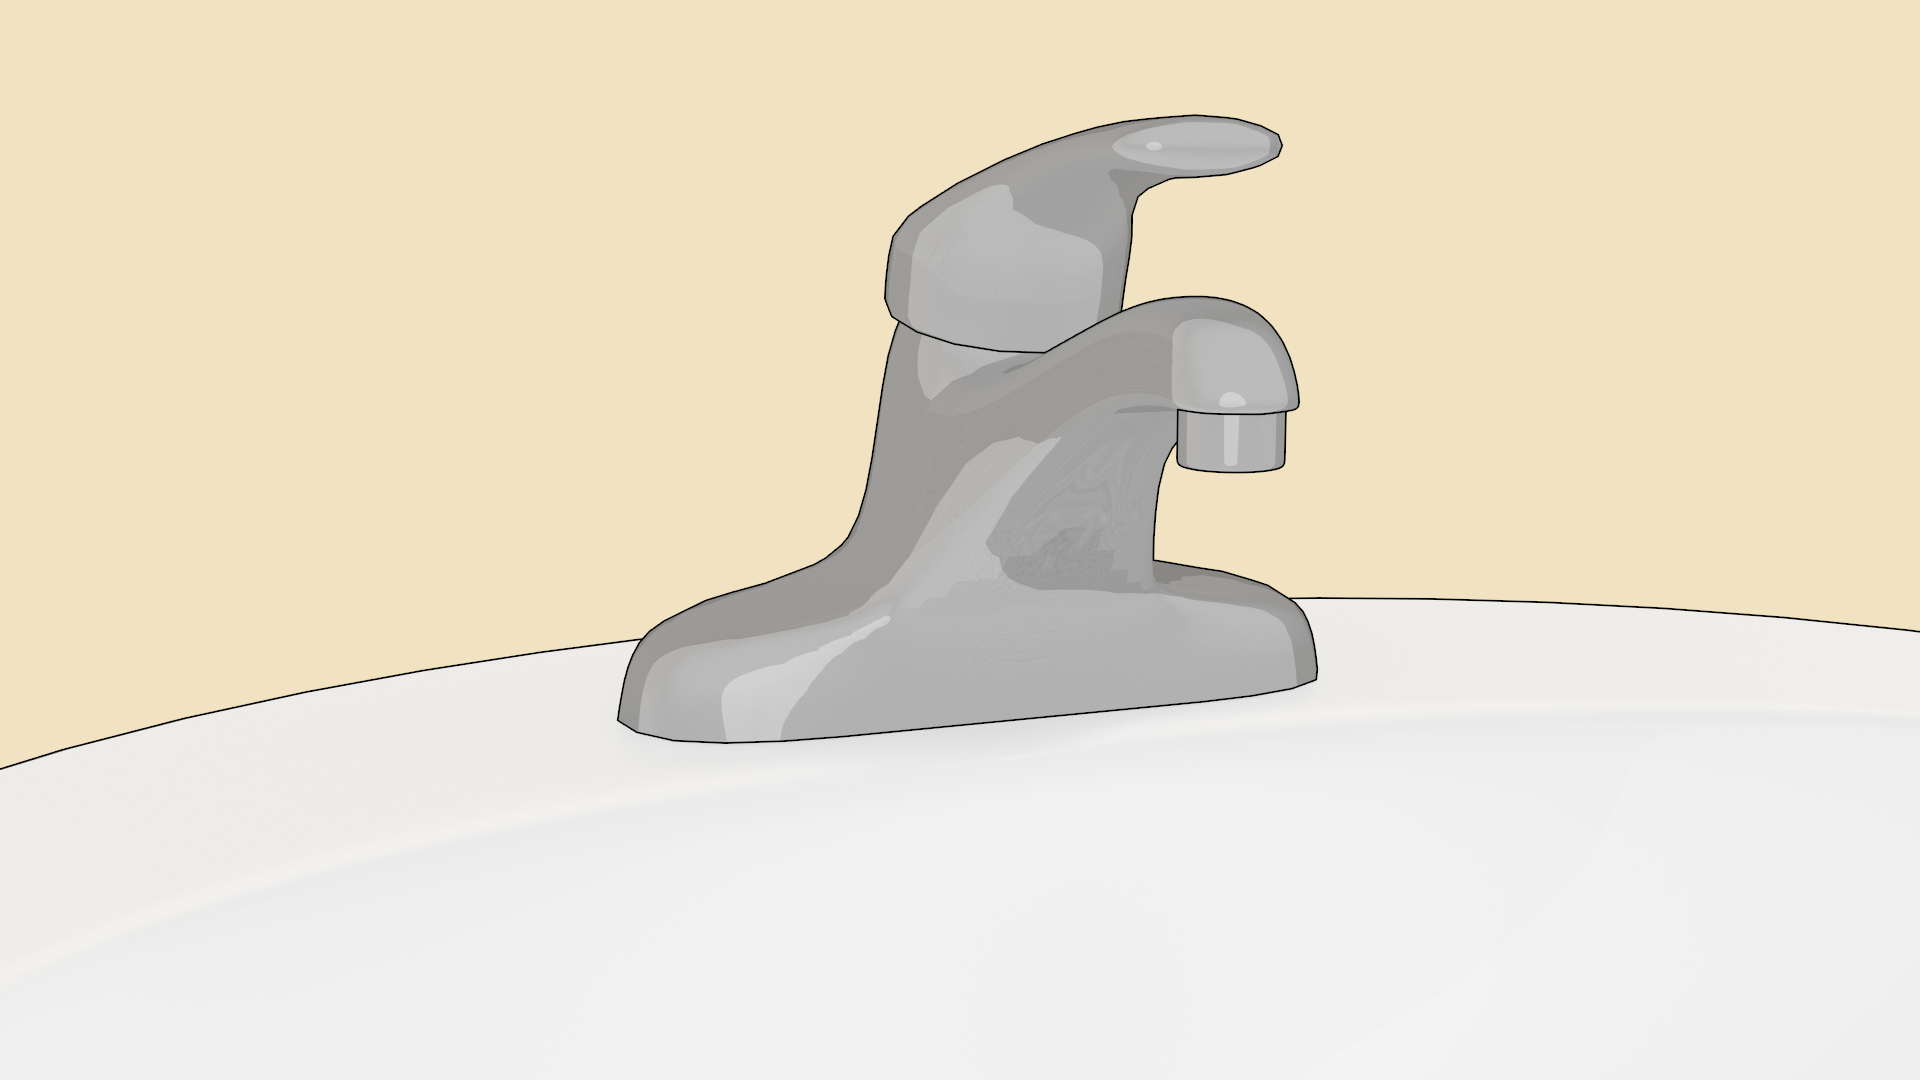 Close-up view of a single-lever manual faucet.